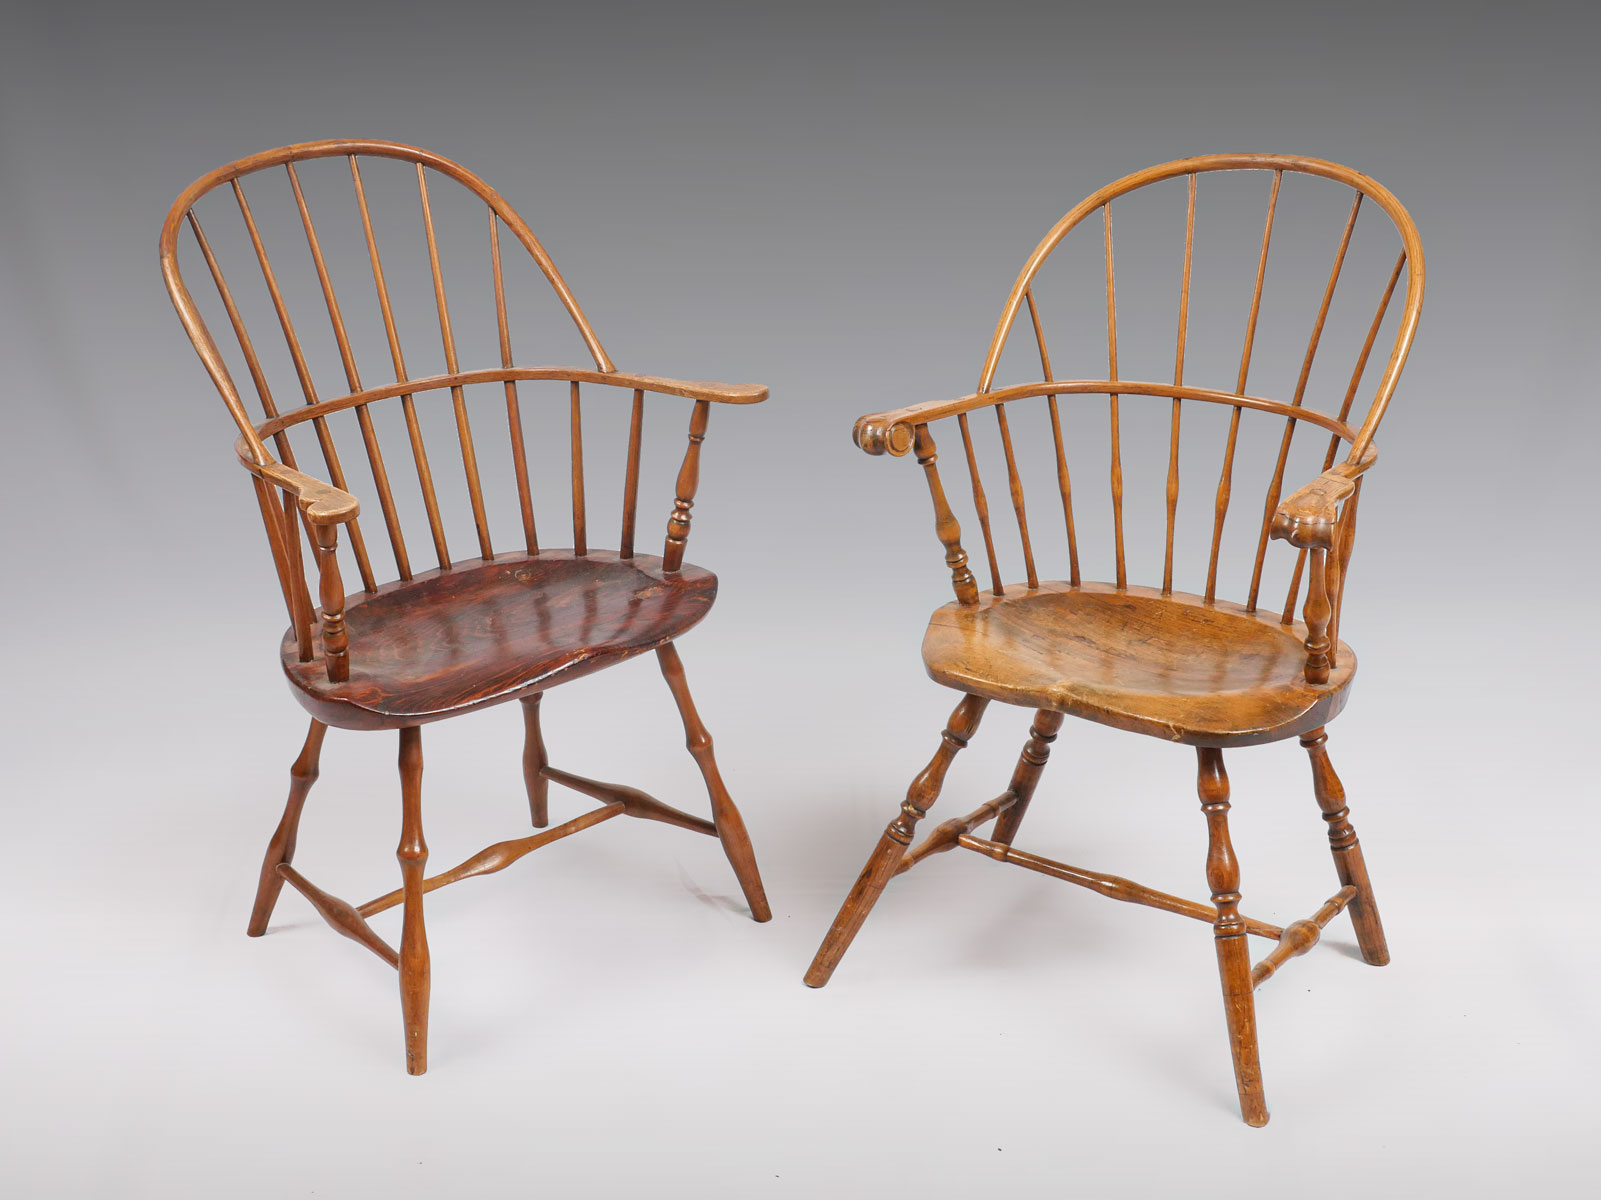 2 PC. WINDSOR BOW-BACK CHAIRS: